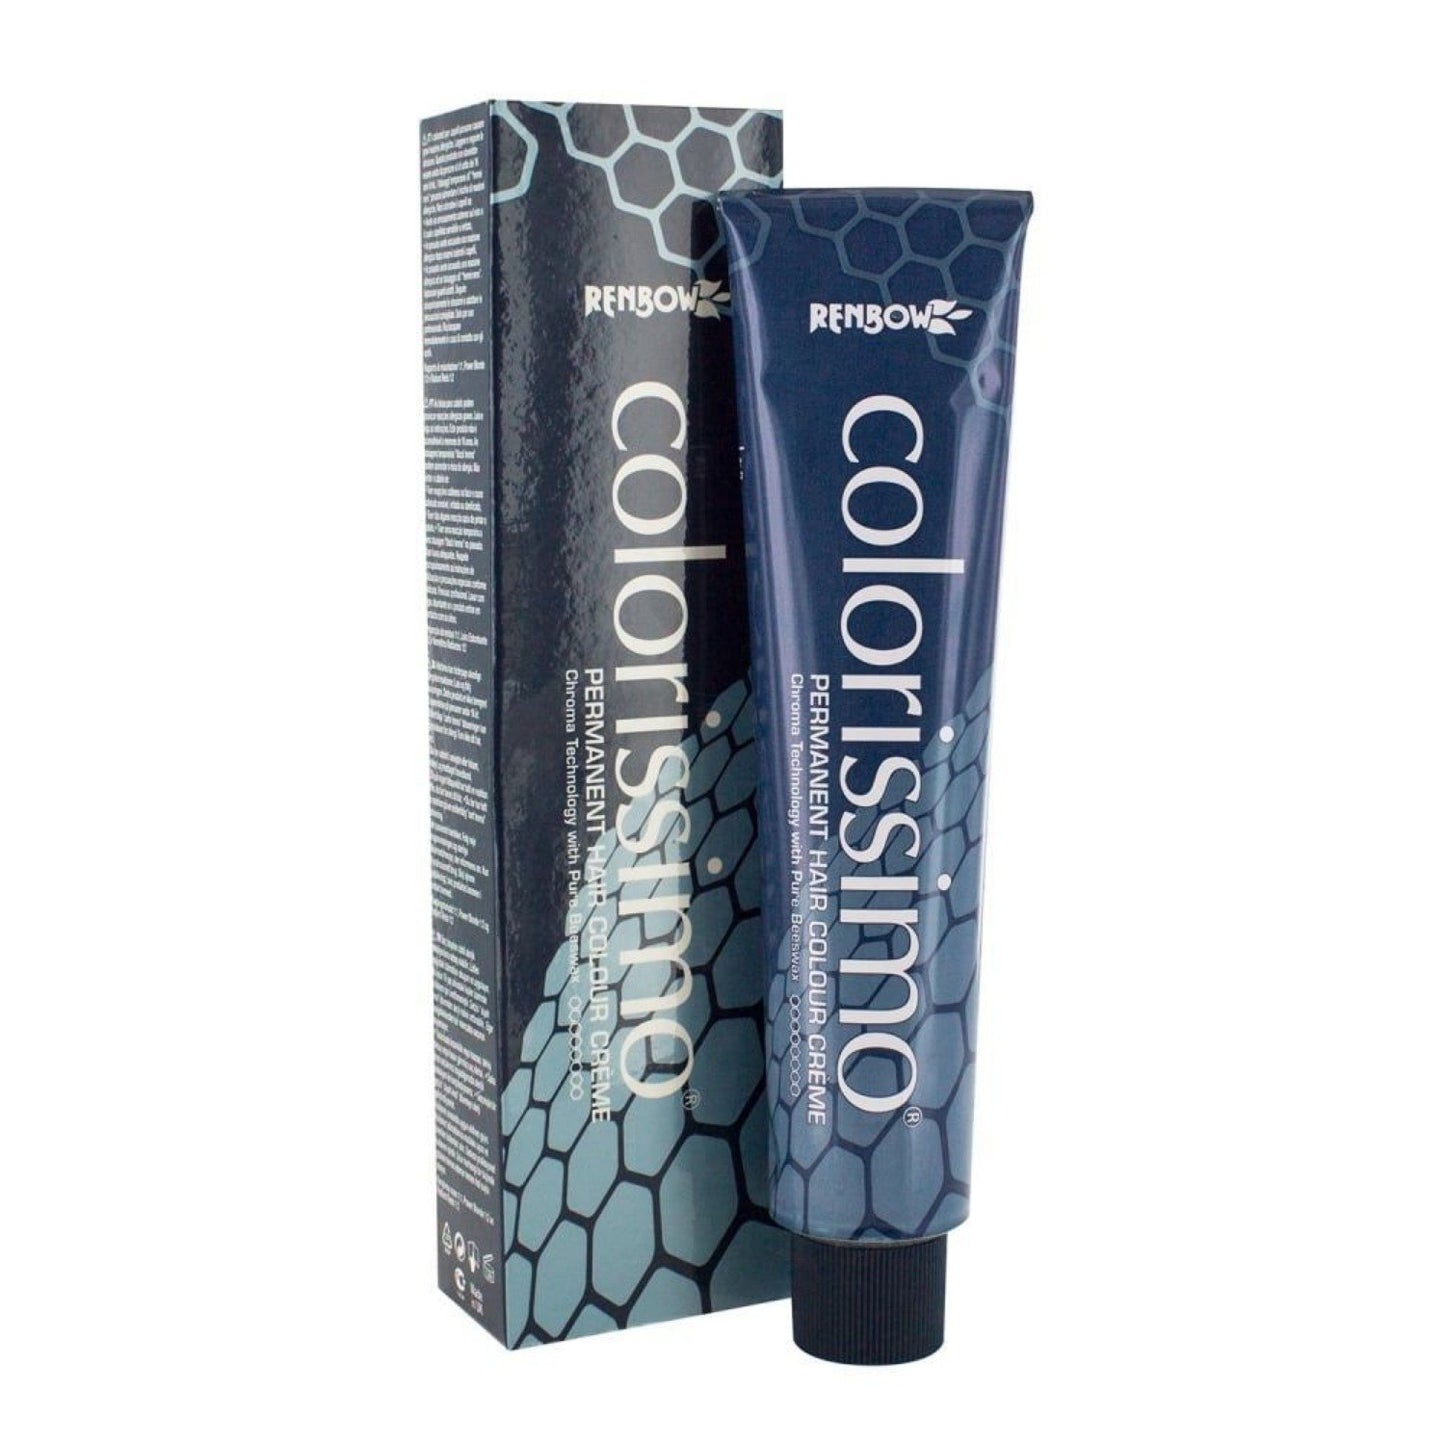 Renbow Colorissimo Permanent Hair Colour Creme - 100ml, 6NW Dark Natural Warm Blonde